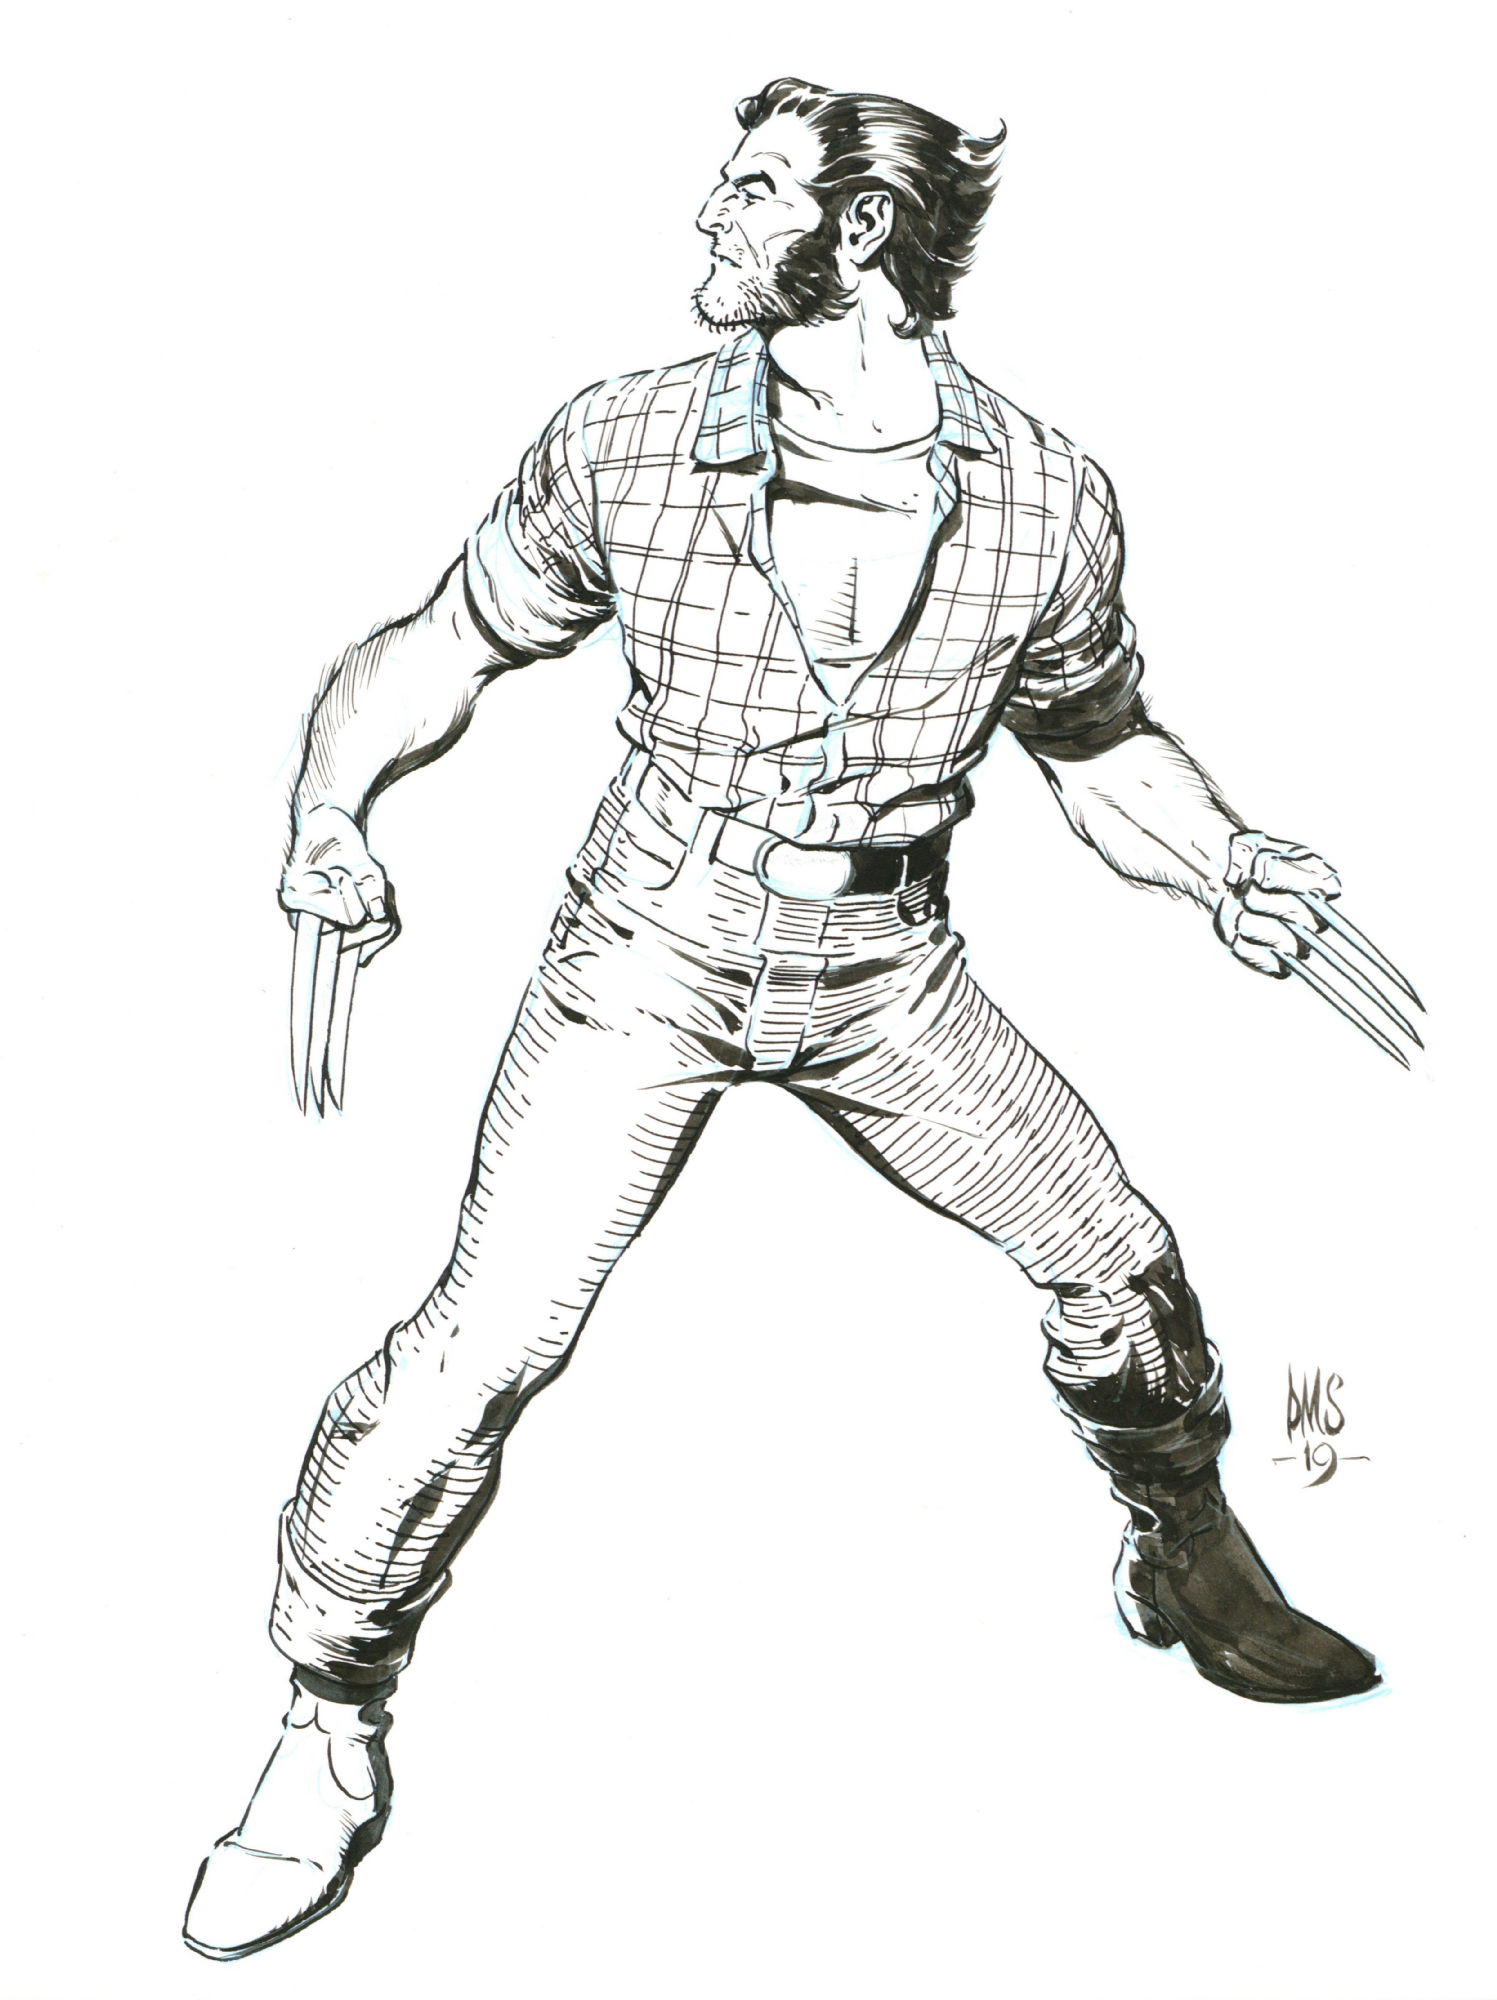 Wolverine Commission By Paul Smith In Shaun Clancy S Commissions Comic Art Gallery Room